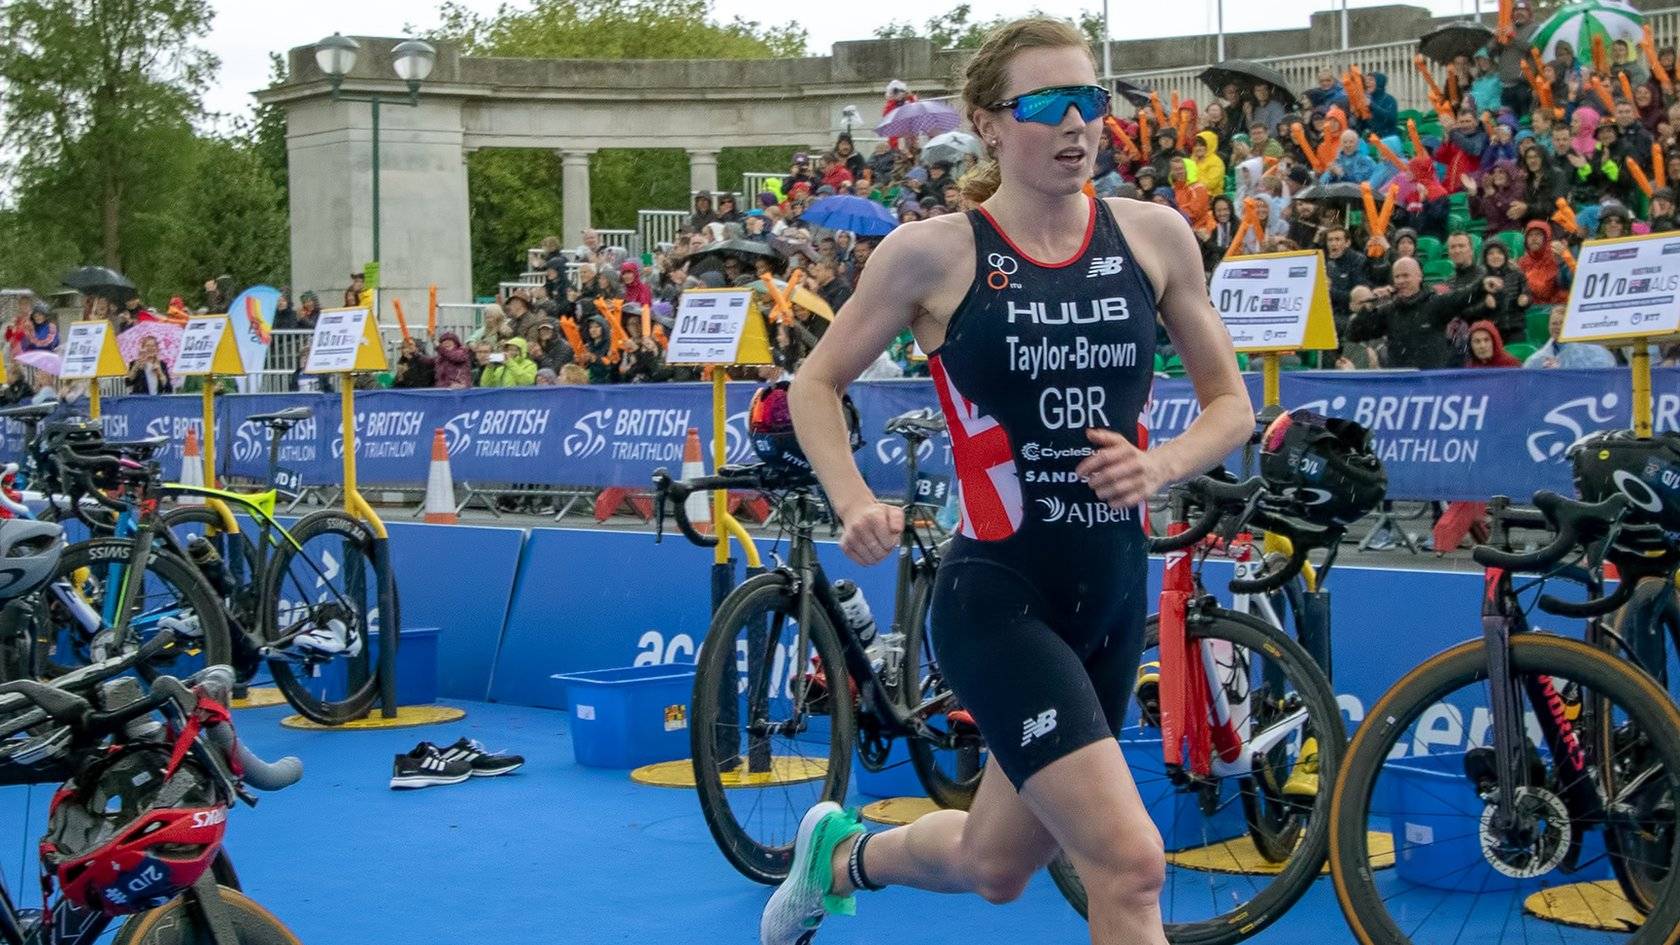 Watch live coverage from the World Triathlon Series Grand Final Live